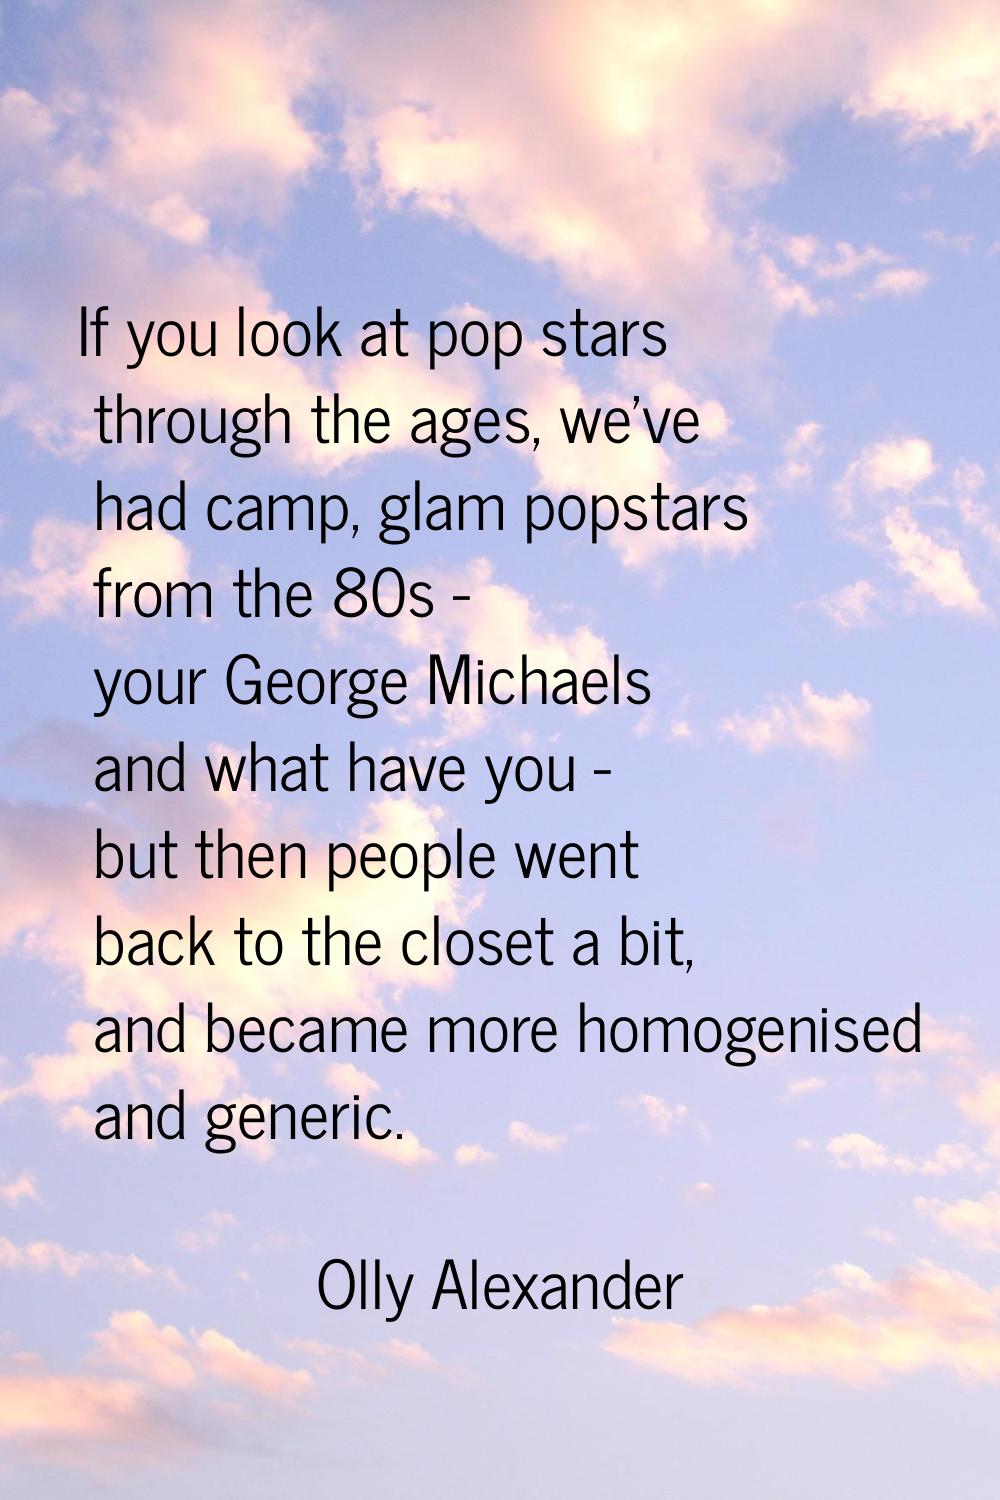 If you look at pop stars through the ages, we've had camp, glam popstars from the 80s - your George